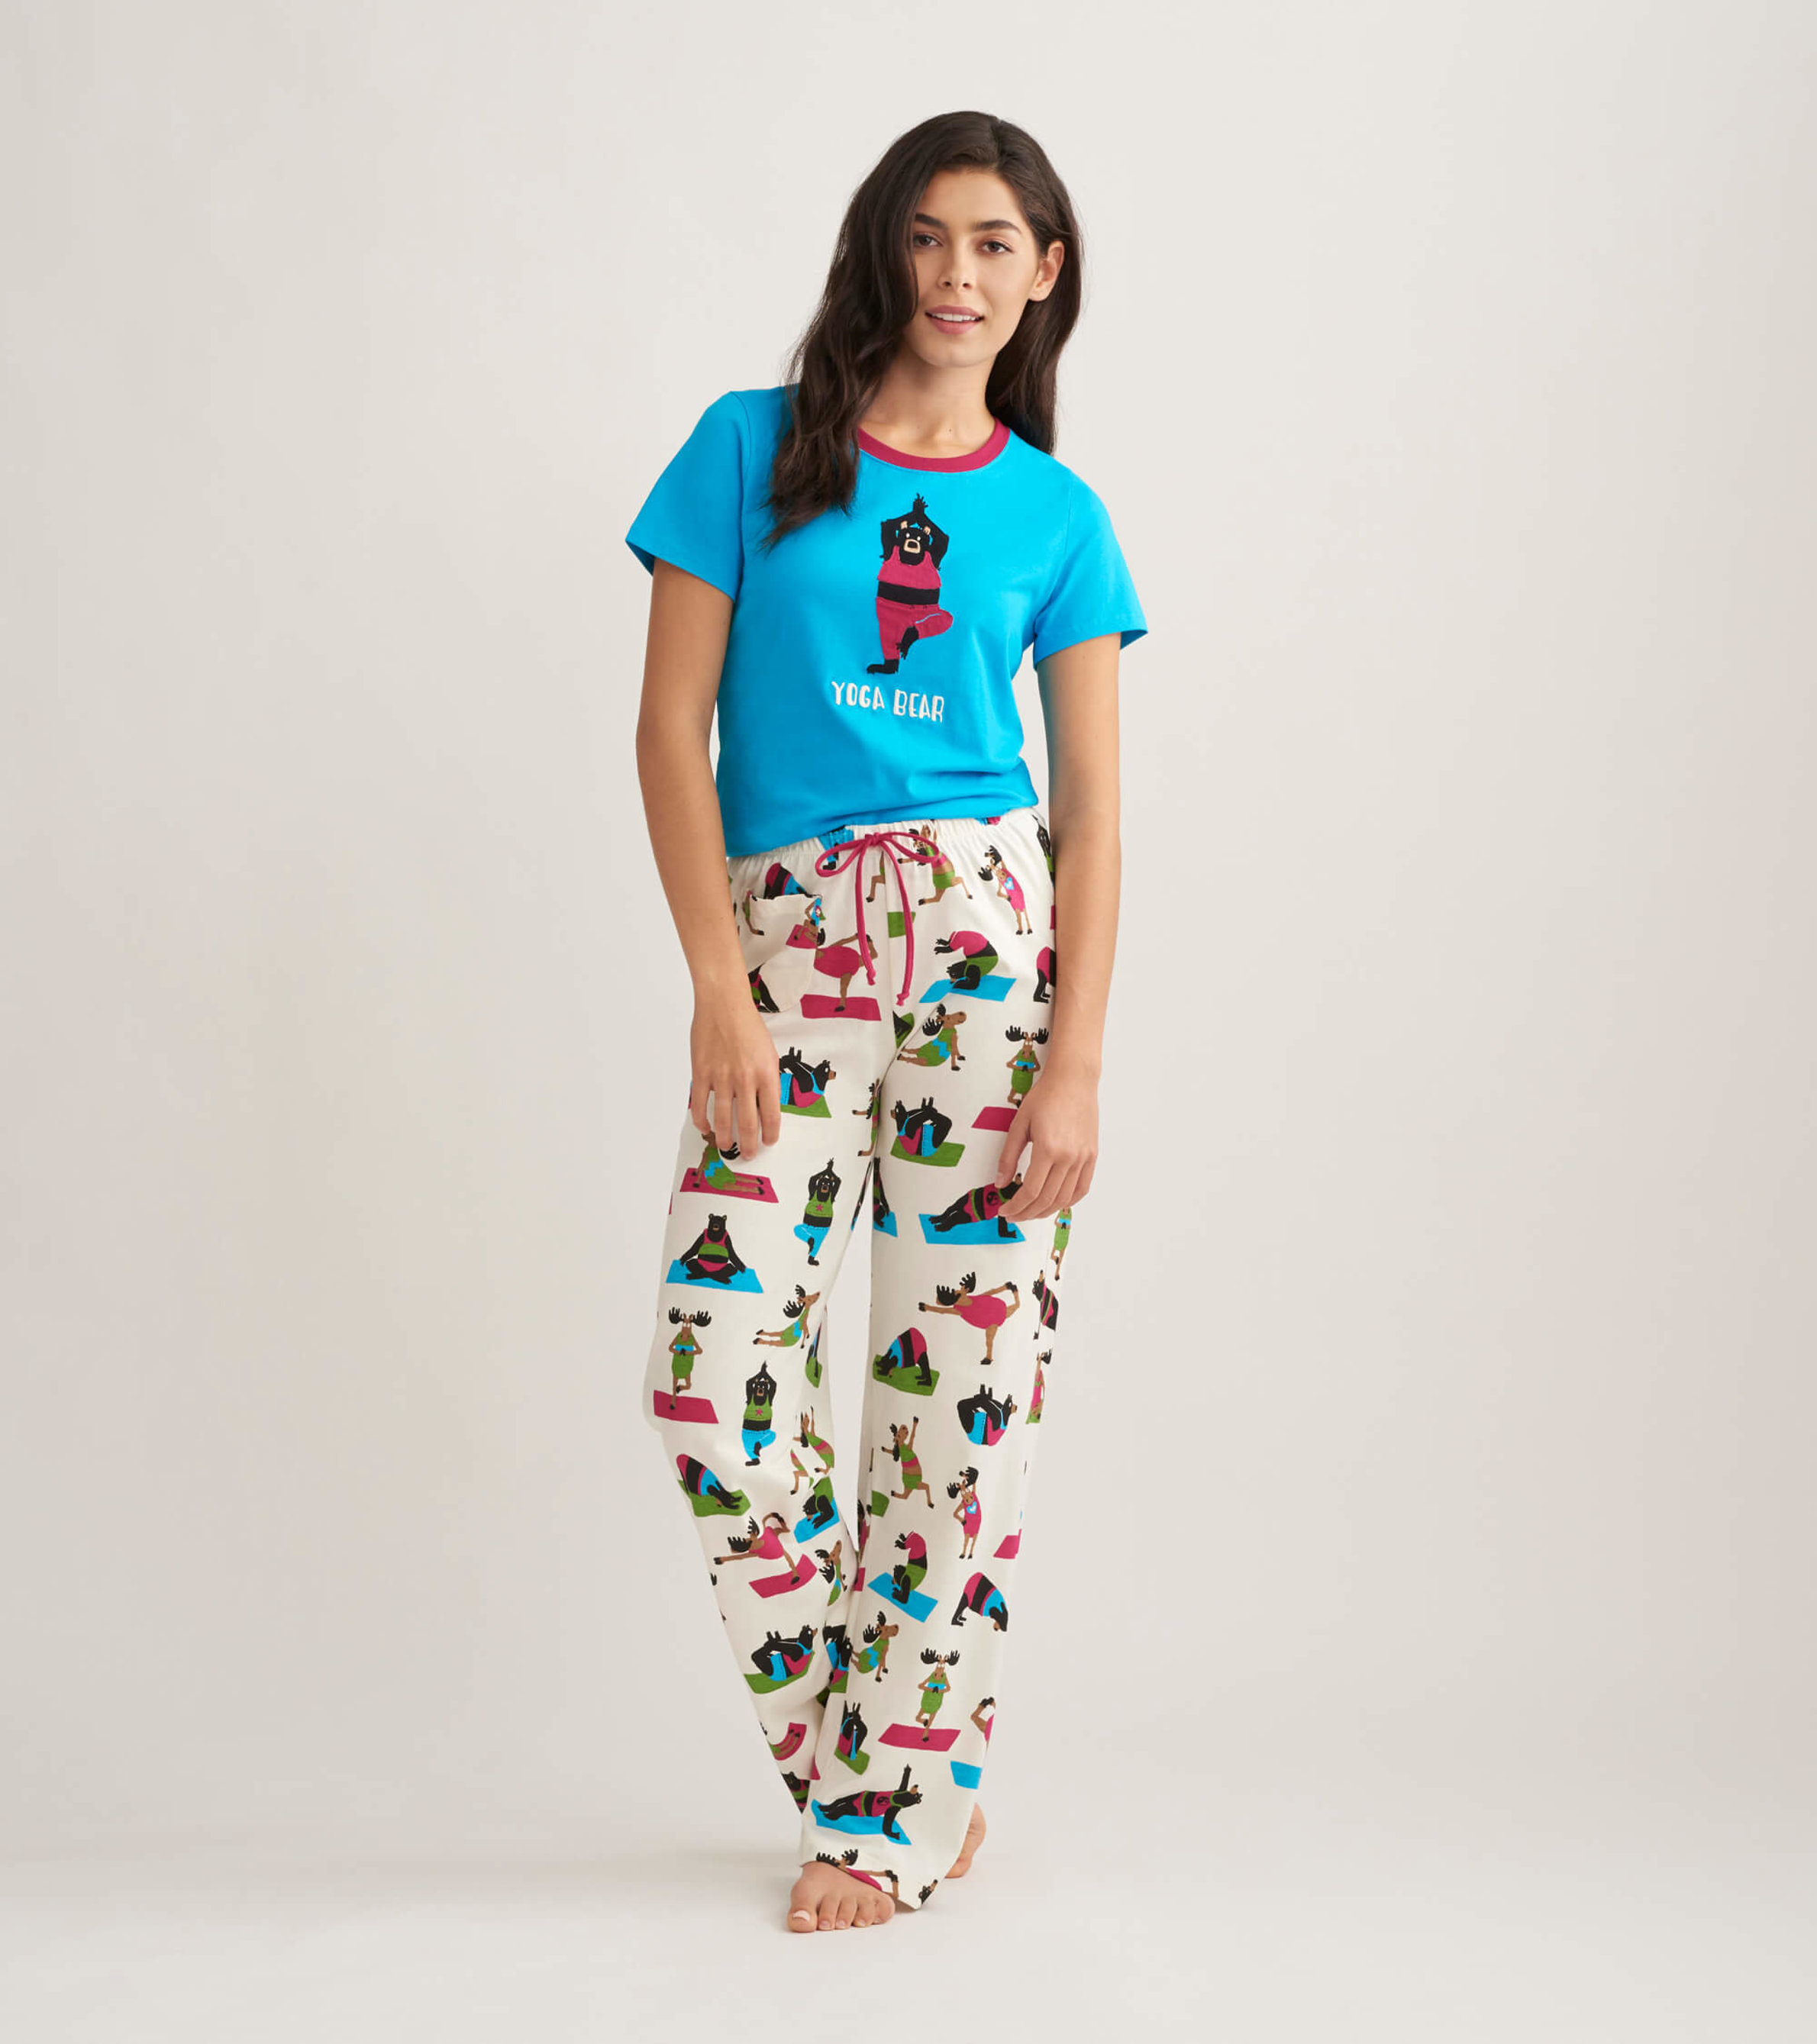 View All - Clothing | Fashion pants, Clothes for women, Fashion outfits